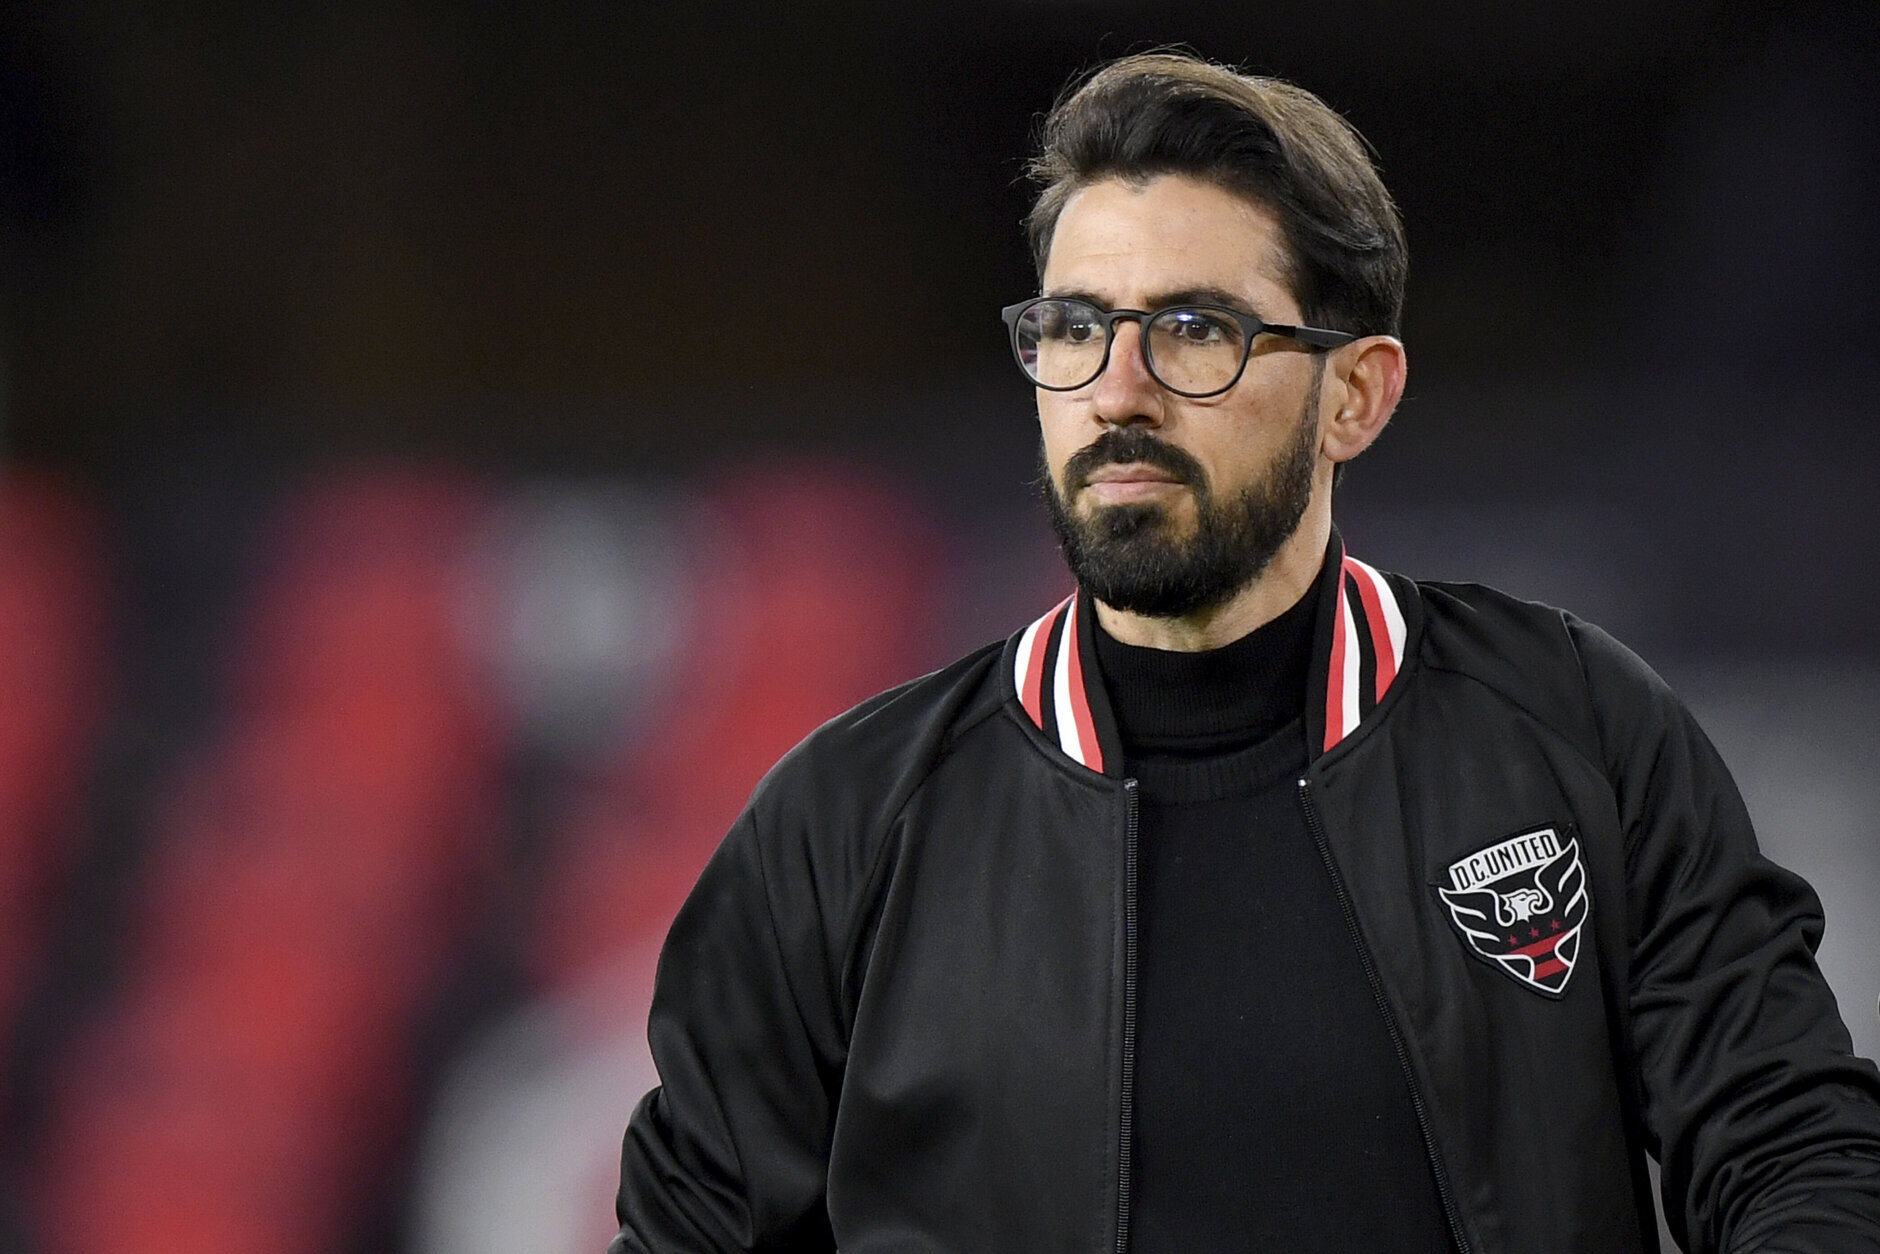 <h3>The Losada era in DCU begins</h3>
<p>In 2021, under the direction of first-year head coach Hernan Losada, D.C. United displayed a go-for-goal attitude, but ultimately fell short of its goal to return to the playoffs for the first time in two years.</p>
<p>That does not mean it was a lost season. Losada arrived in D.C. from Belgium, where he had been coaching in January and wasted no time making it clear he lived and breathed the phrase “vamos por más.” (which is “let’s go for more” in the literal translation to English)</p>
<p>From fitness to nutrition to play on the field, Losada wanted his players to do more and give more. The result was D.C. scoring 56 goals in 34 games, tied for third-highest scoring team in the league — trailing only MLS Cup finalists New York City F.C. and Portland. United’s identity is in place and now the challenge is to make it mean something long-term.</p>
<p><em>— Dave Johnson</em></p>
